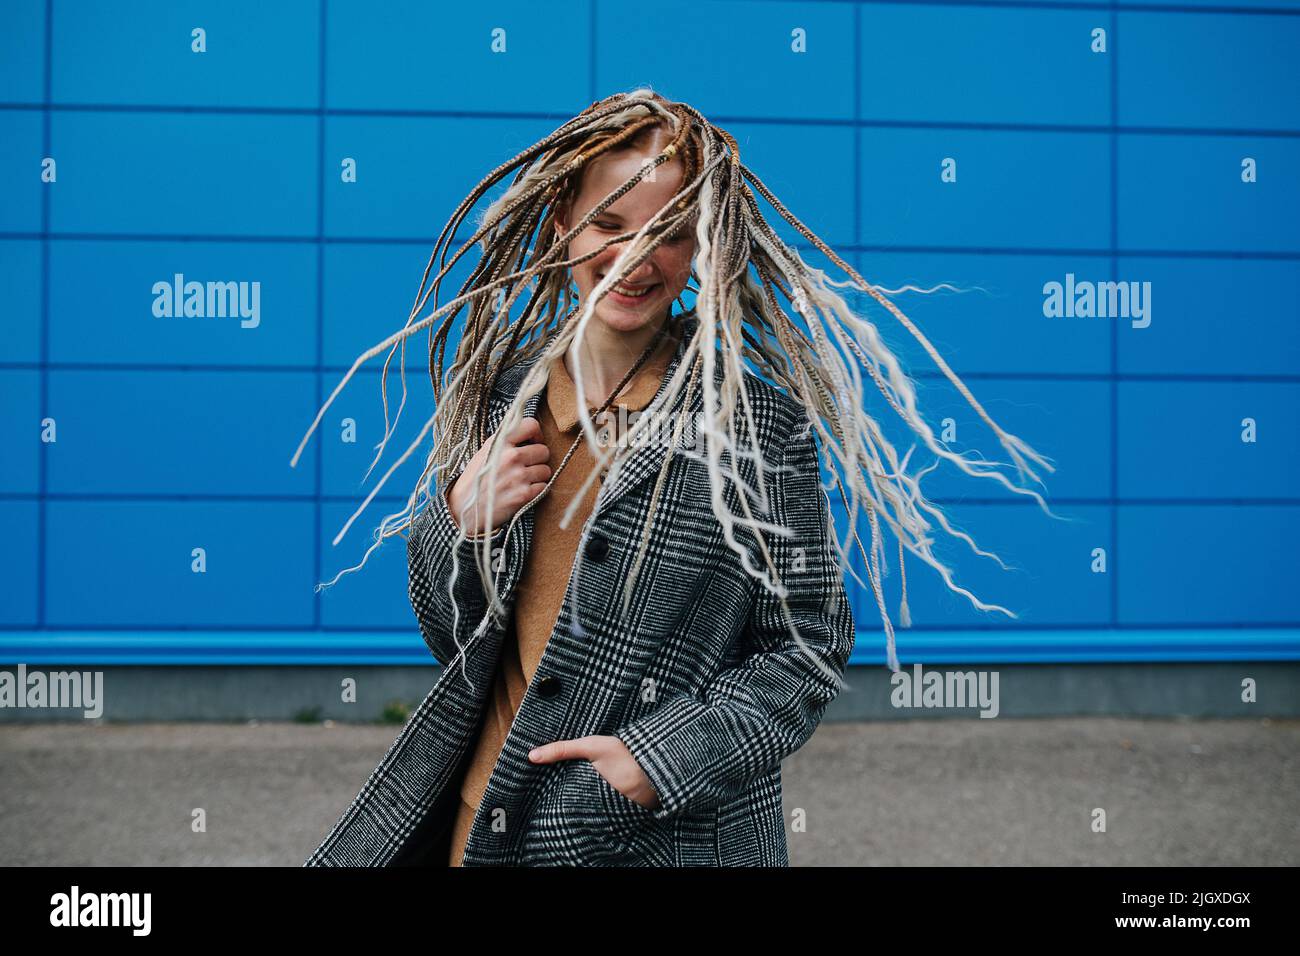 Shaking dreads lighthearted teenage girl in front of a blue panel wall covering. She is wearing a grey checkered jacket. Portrait. Stock Photo